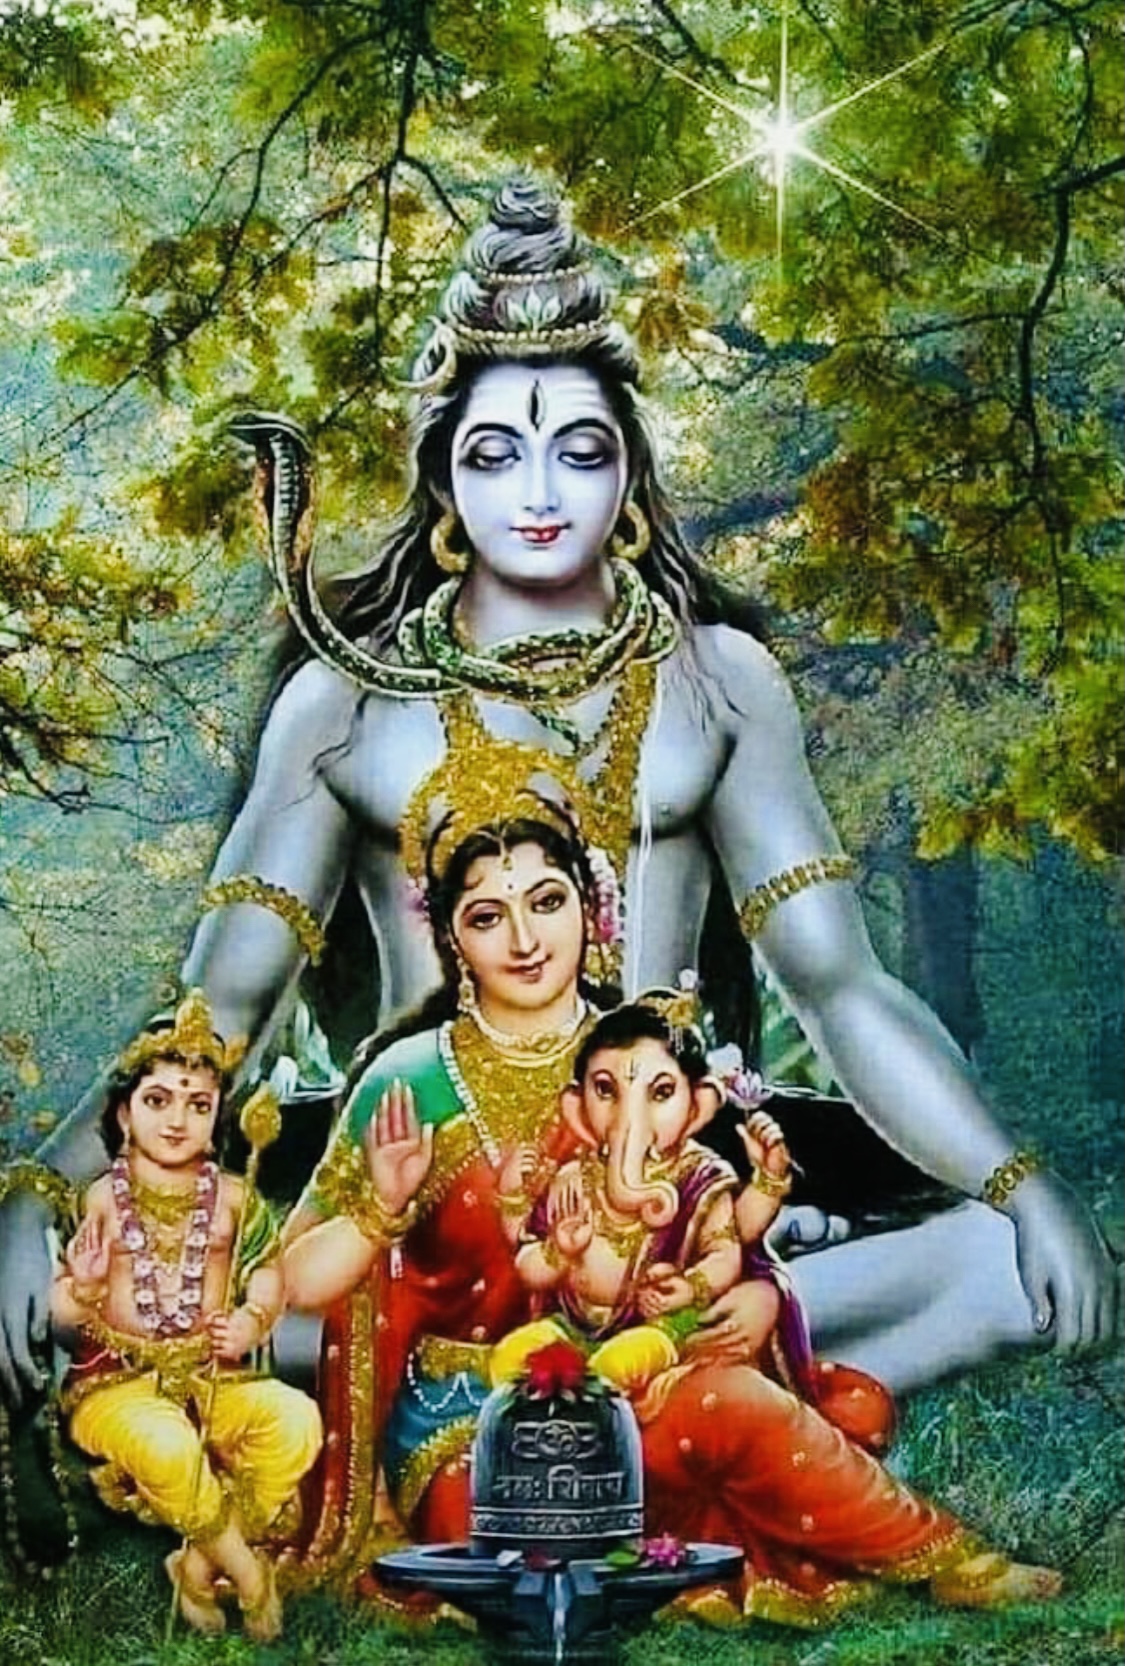 Top 999+ full hd images of lord shiva – Amazing Collection full hd images of lord shiva Full 4K